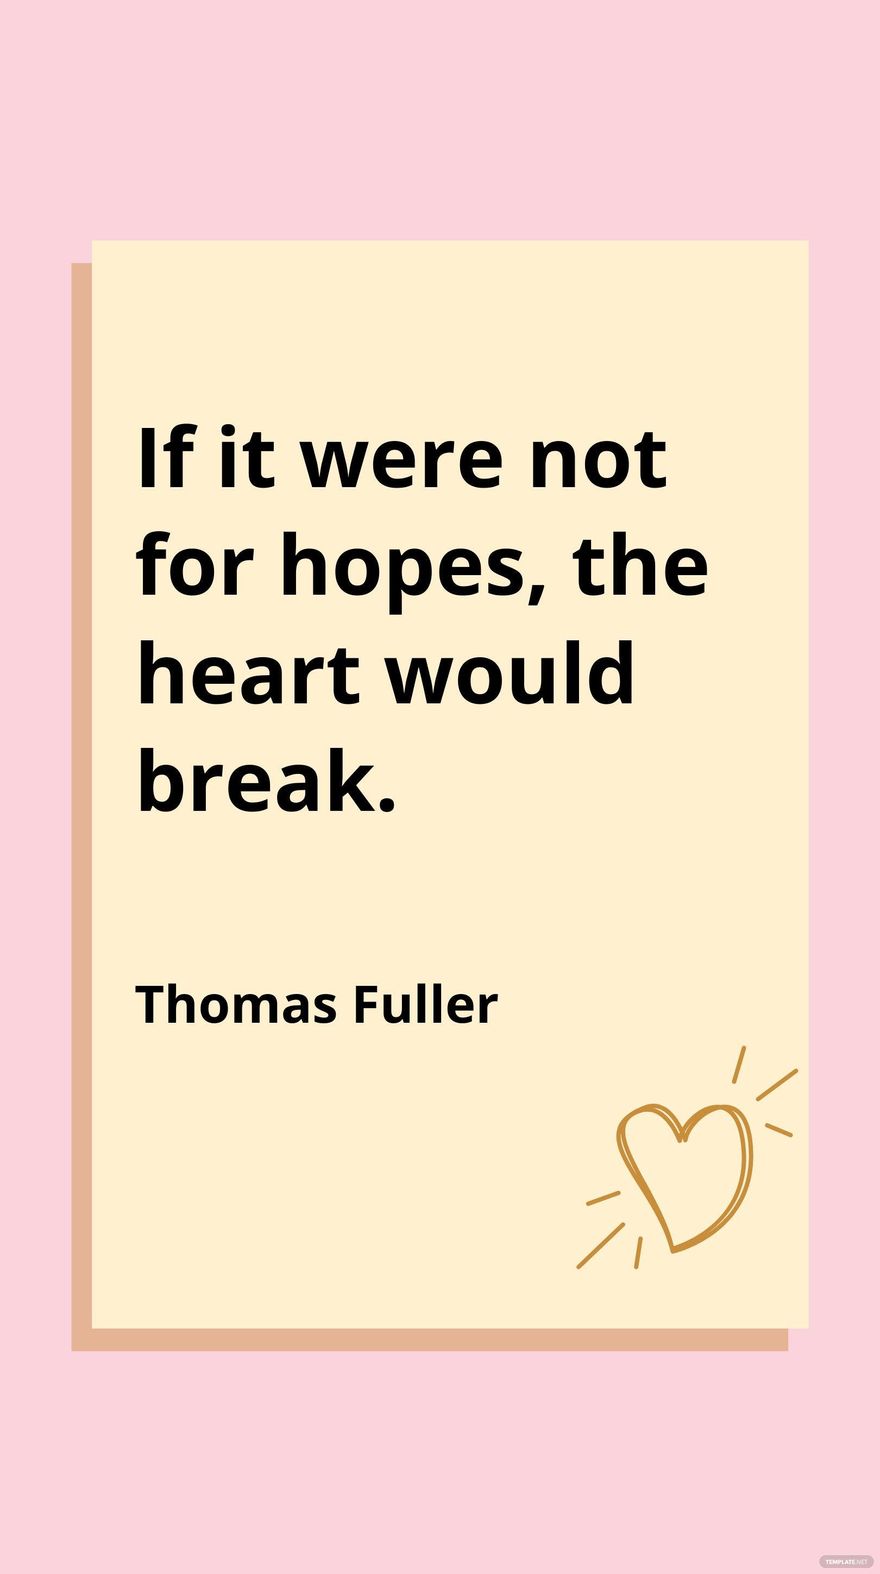 Free Thomas Fuller - If it were not for hopes, the heart would break. in JPG